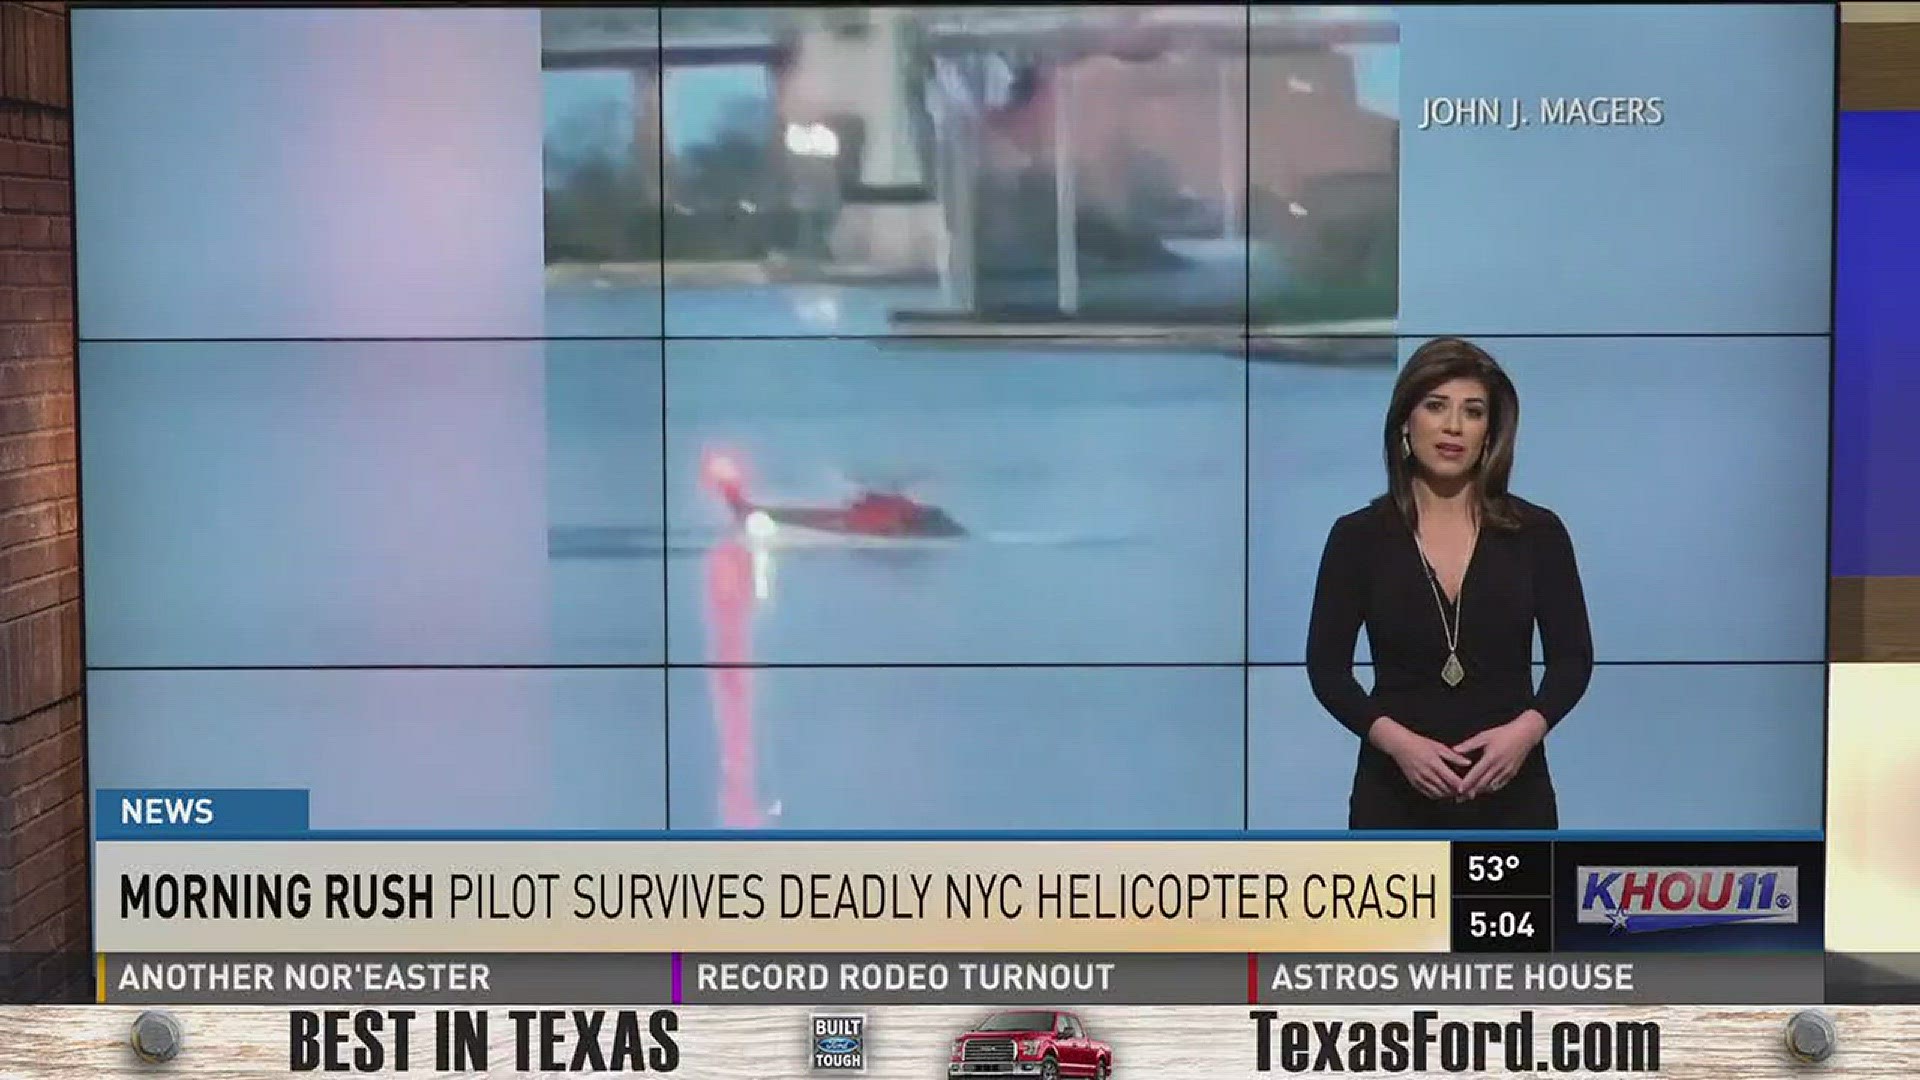 KHOU 11 News This Morning has the day's headlines